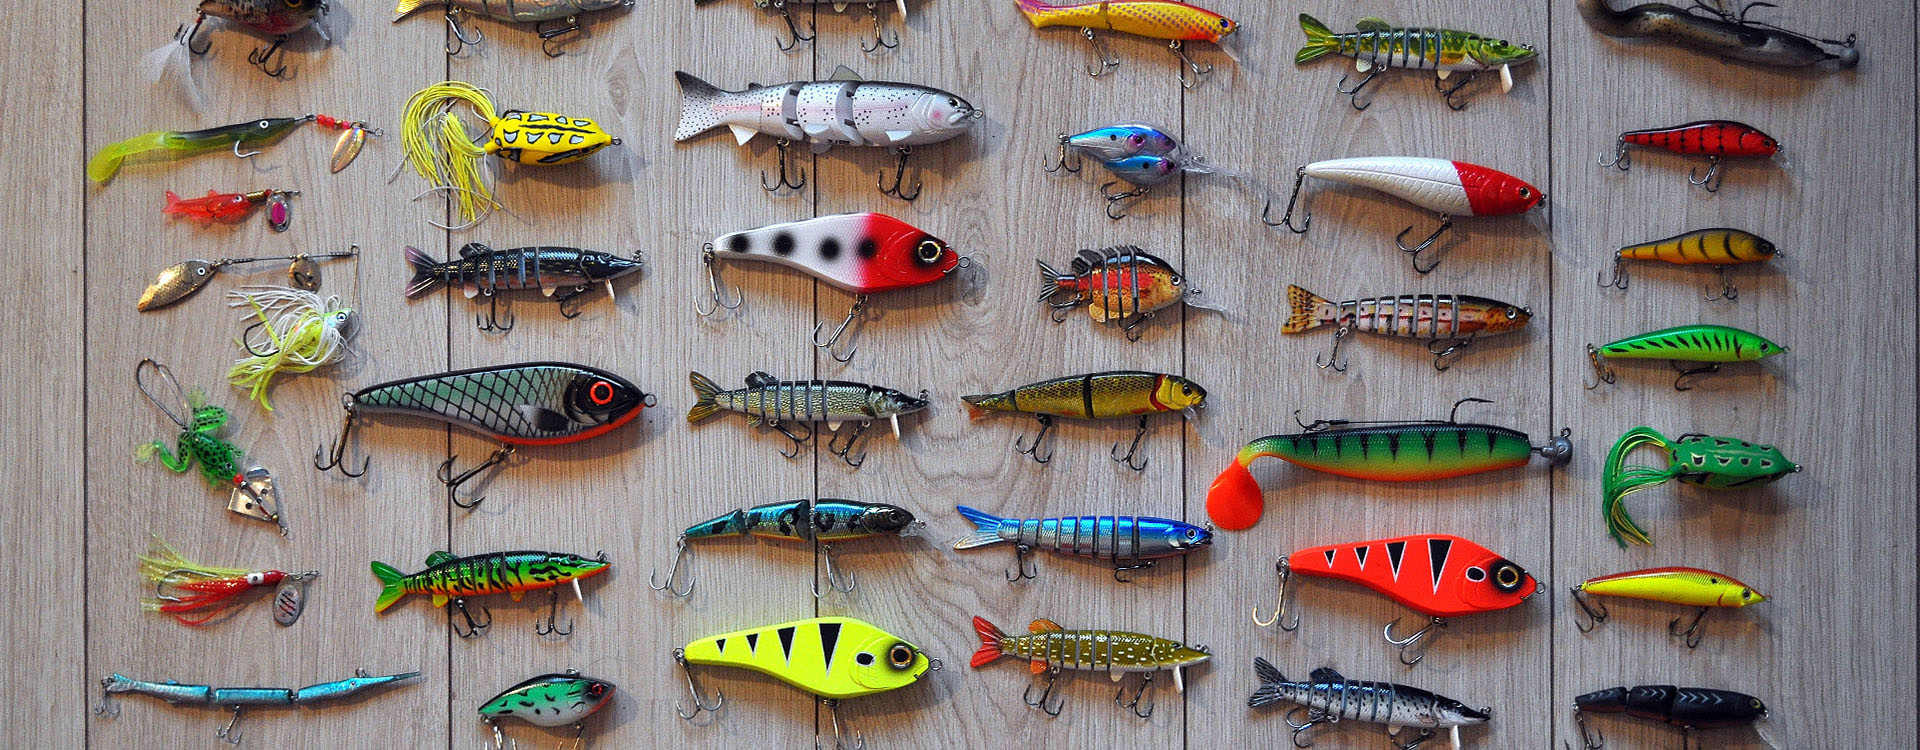 What are some basic lures that can be used by any angler, regardless of  skill, on any type of fish? - Quora